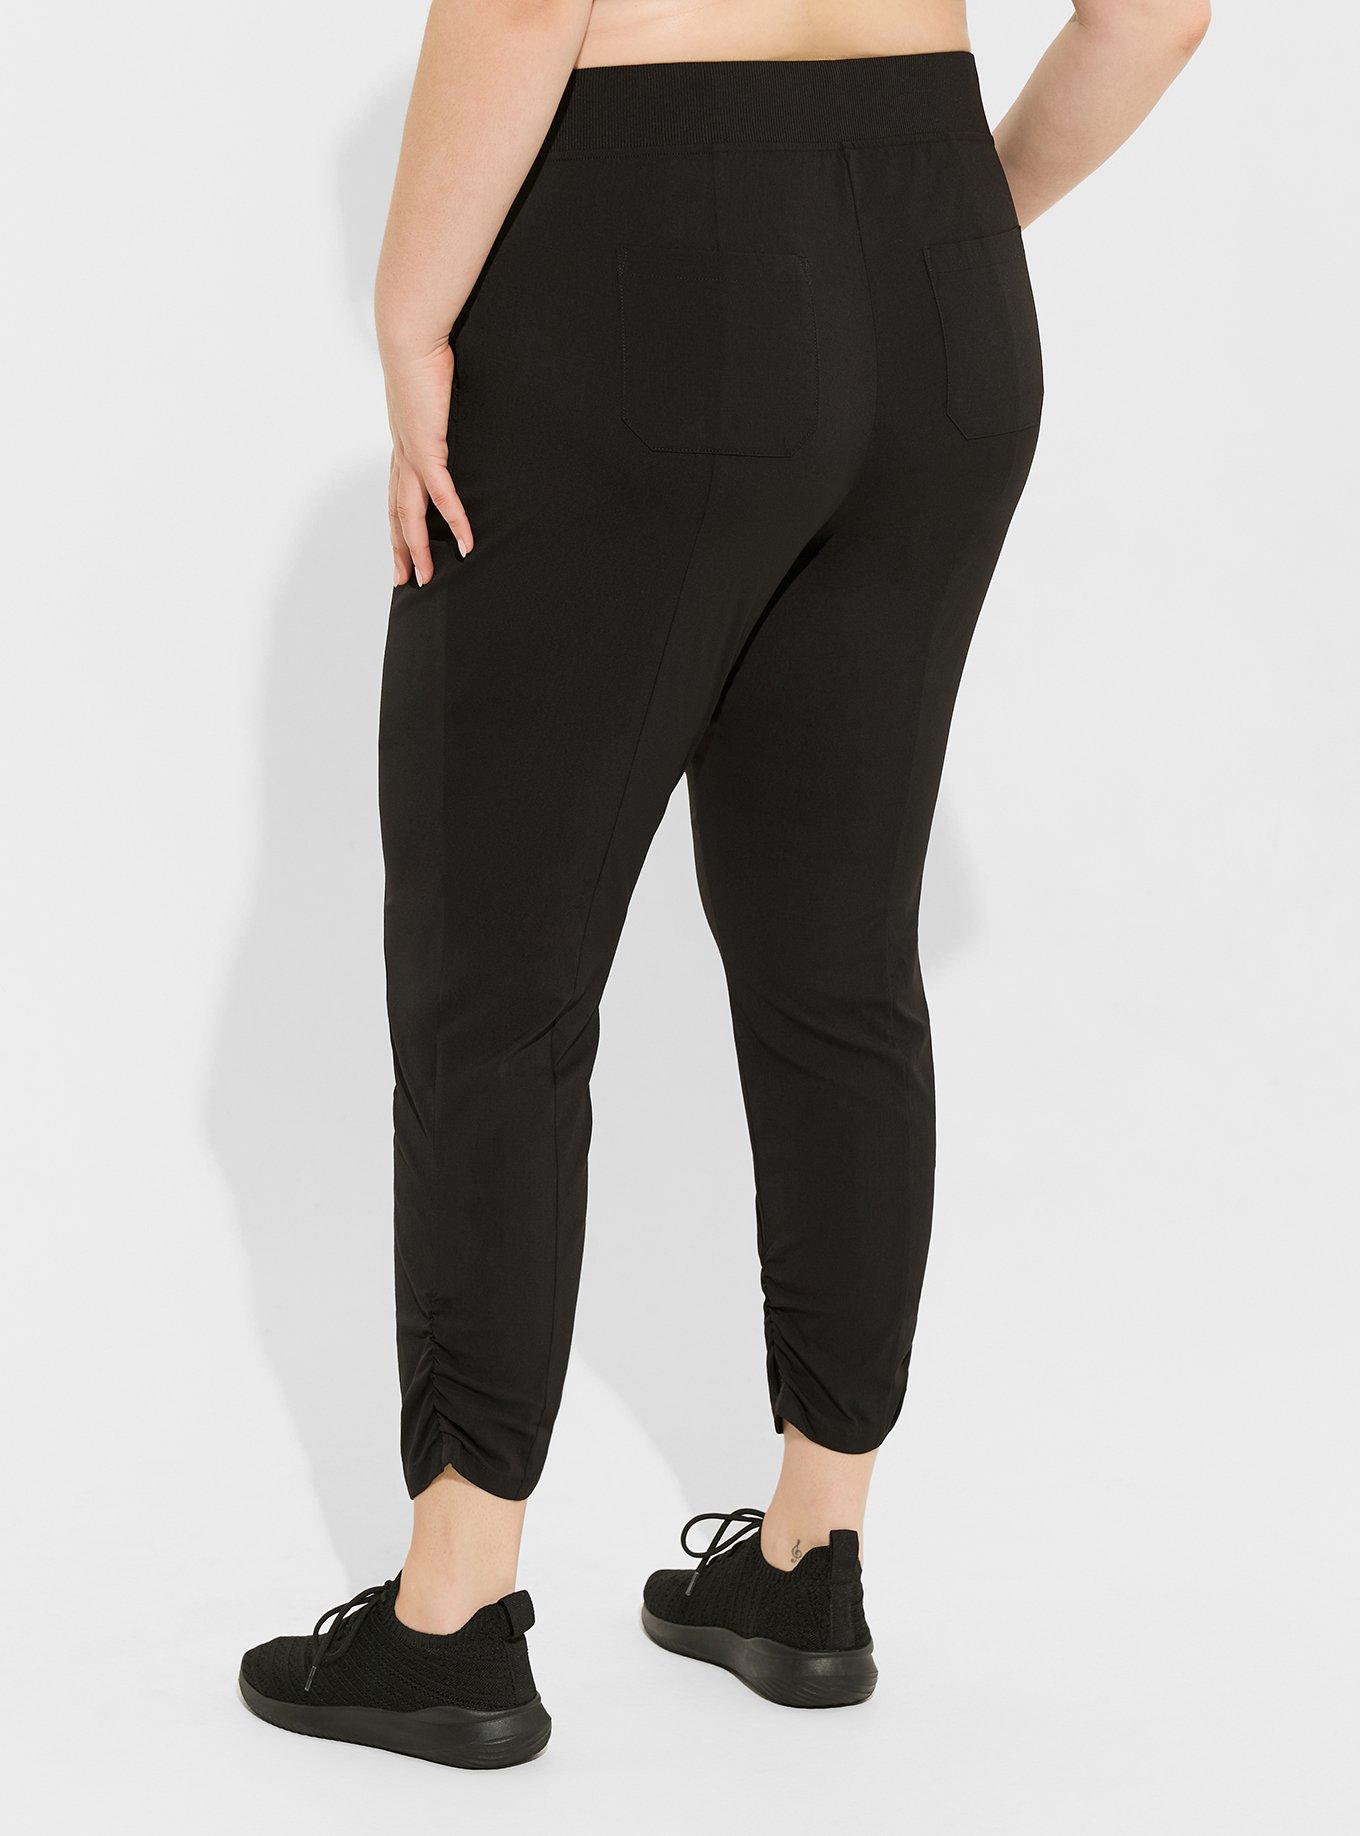 Buy Victoria's Secret PINK Deep Lake Wash Performance Cotton Fold Over Yoga  Pants from Next Ireland